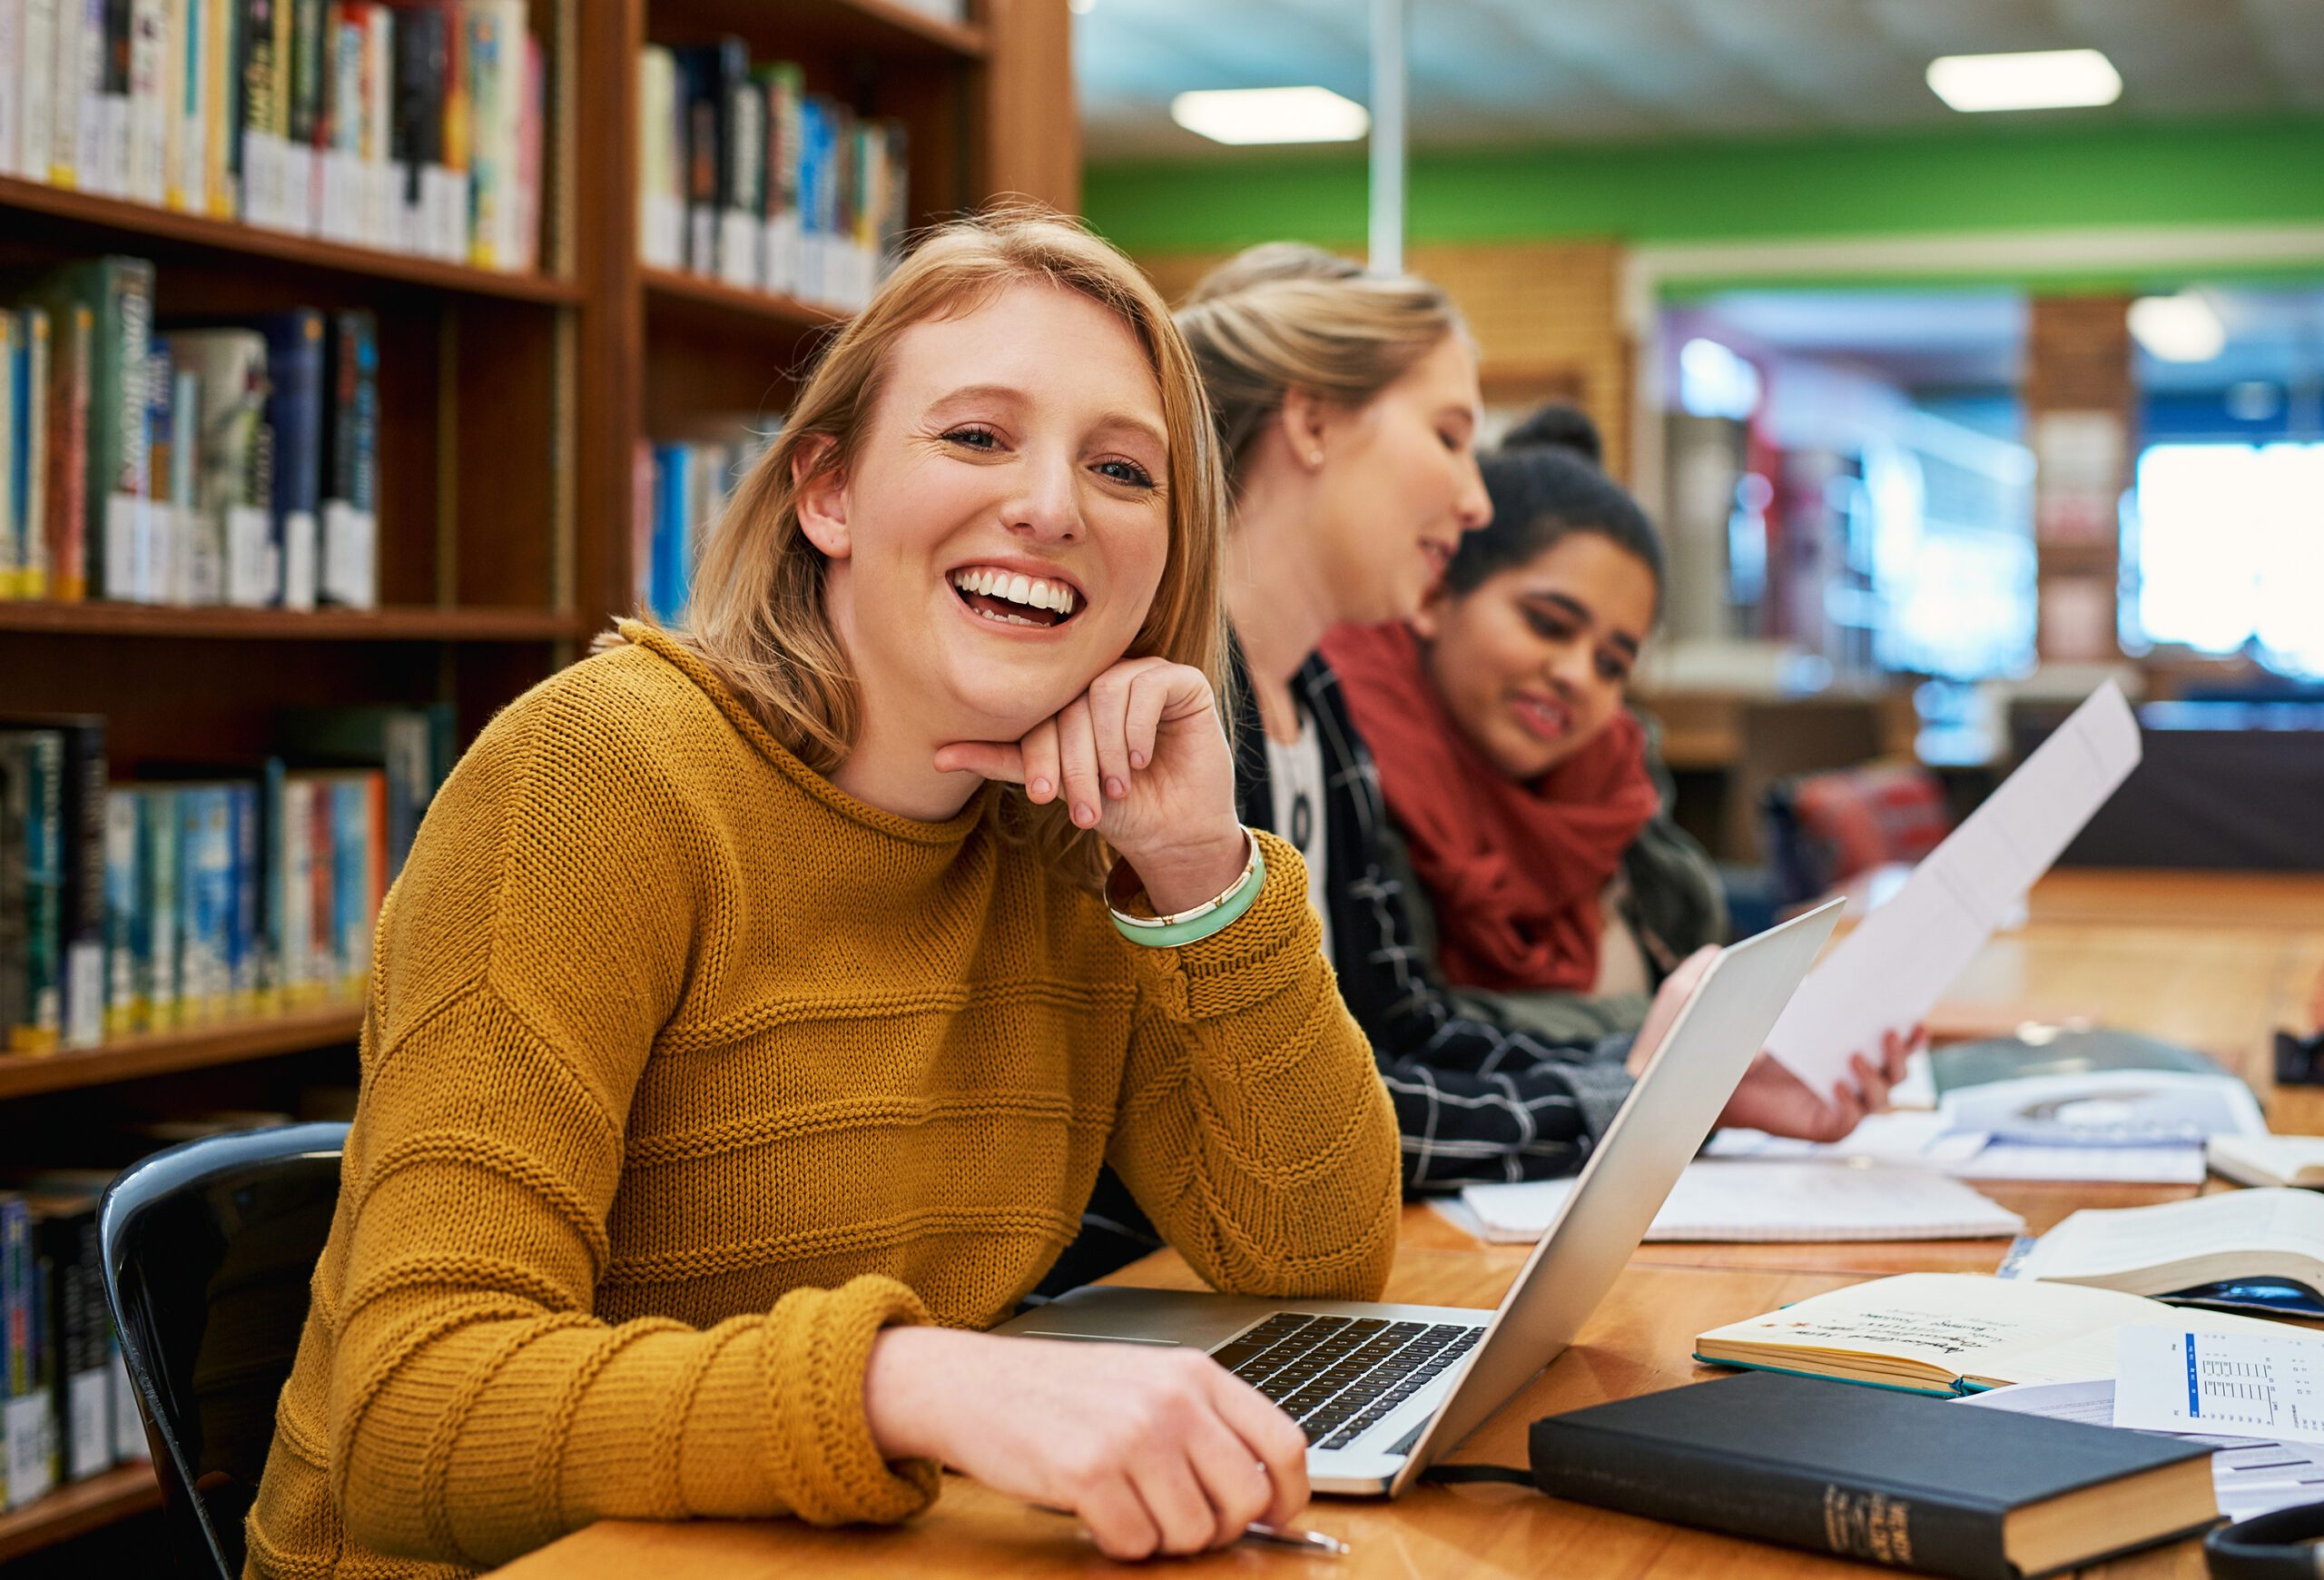 Happy young women studying in a library with papers and laptops